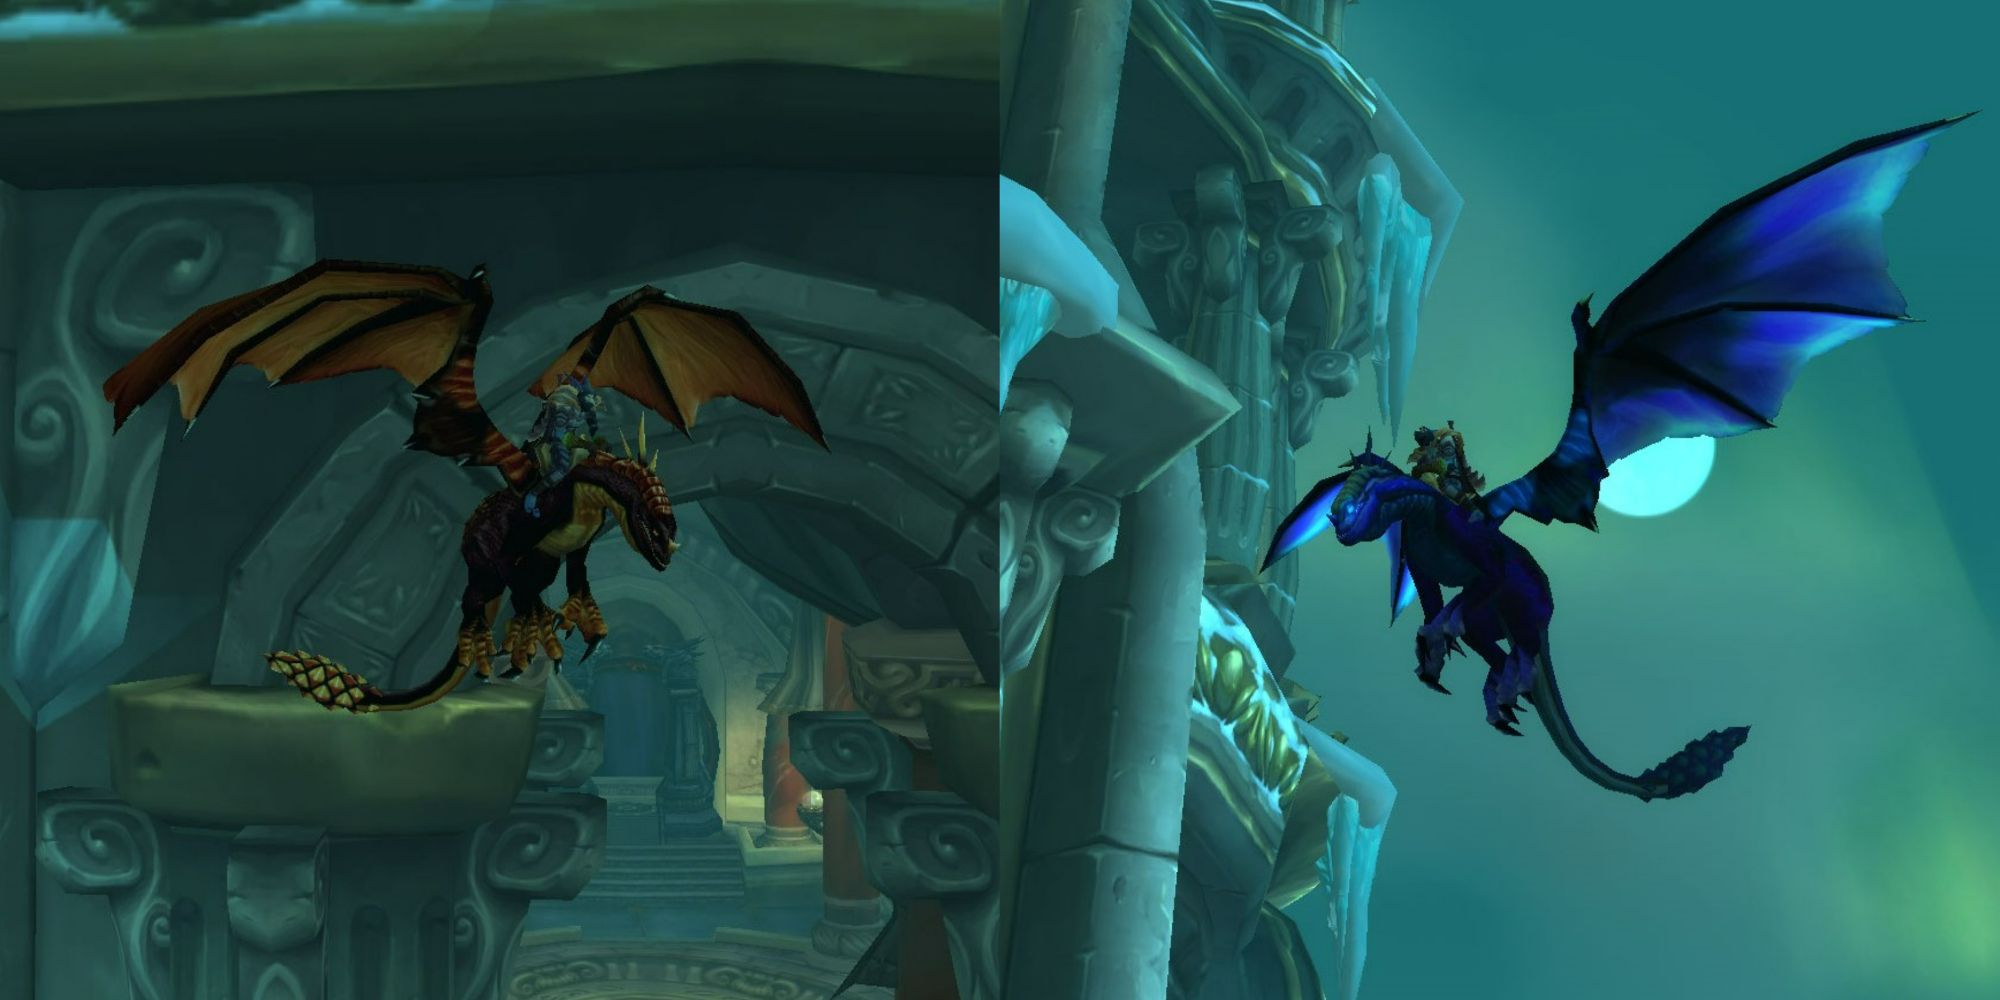 World of Warcraft Wrath of the Lich King split image of Black and Twilight drake mounts